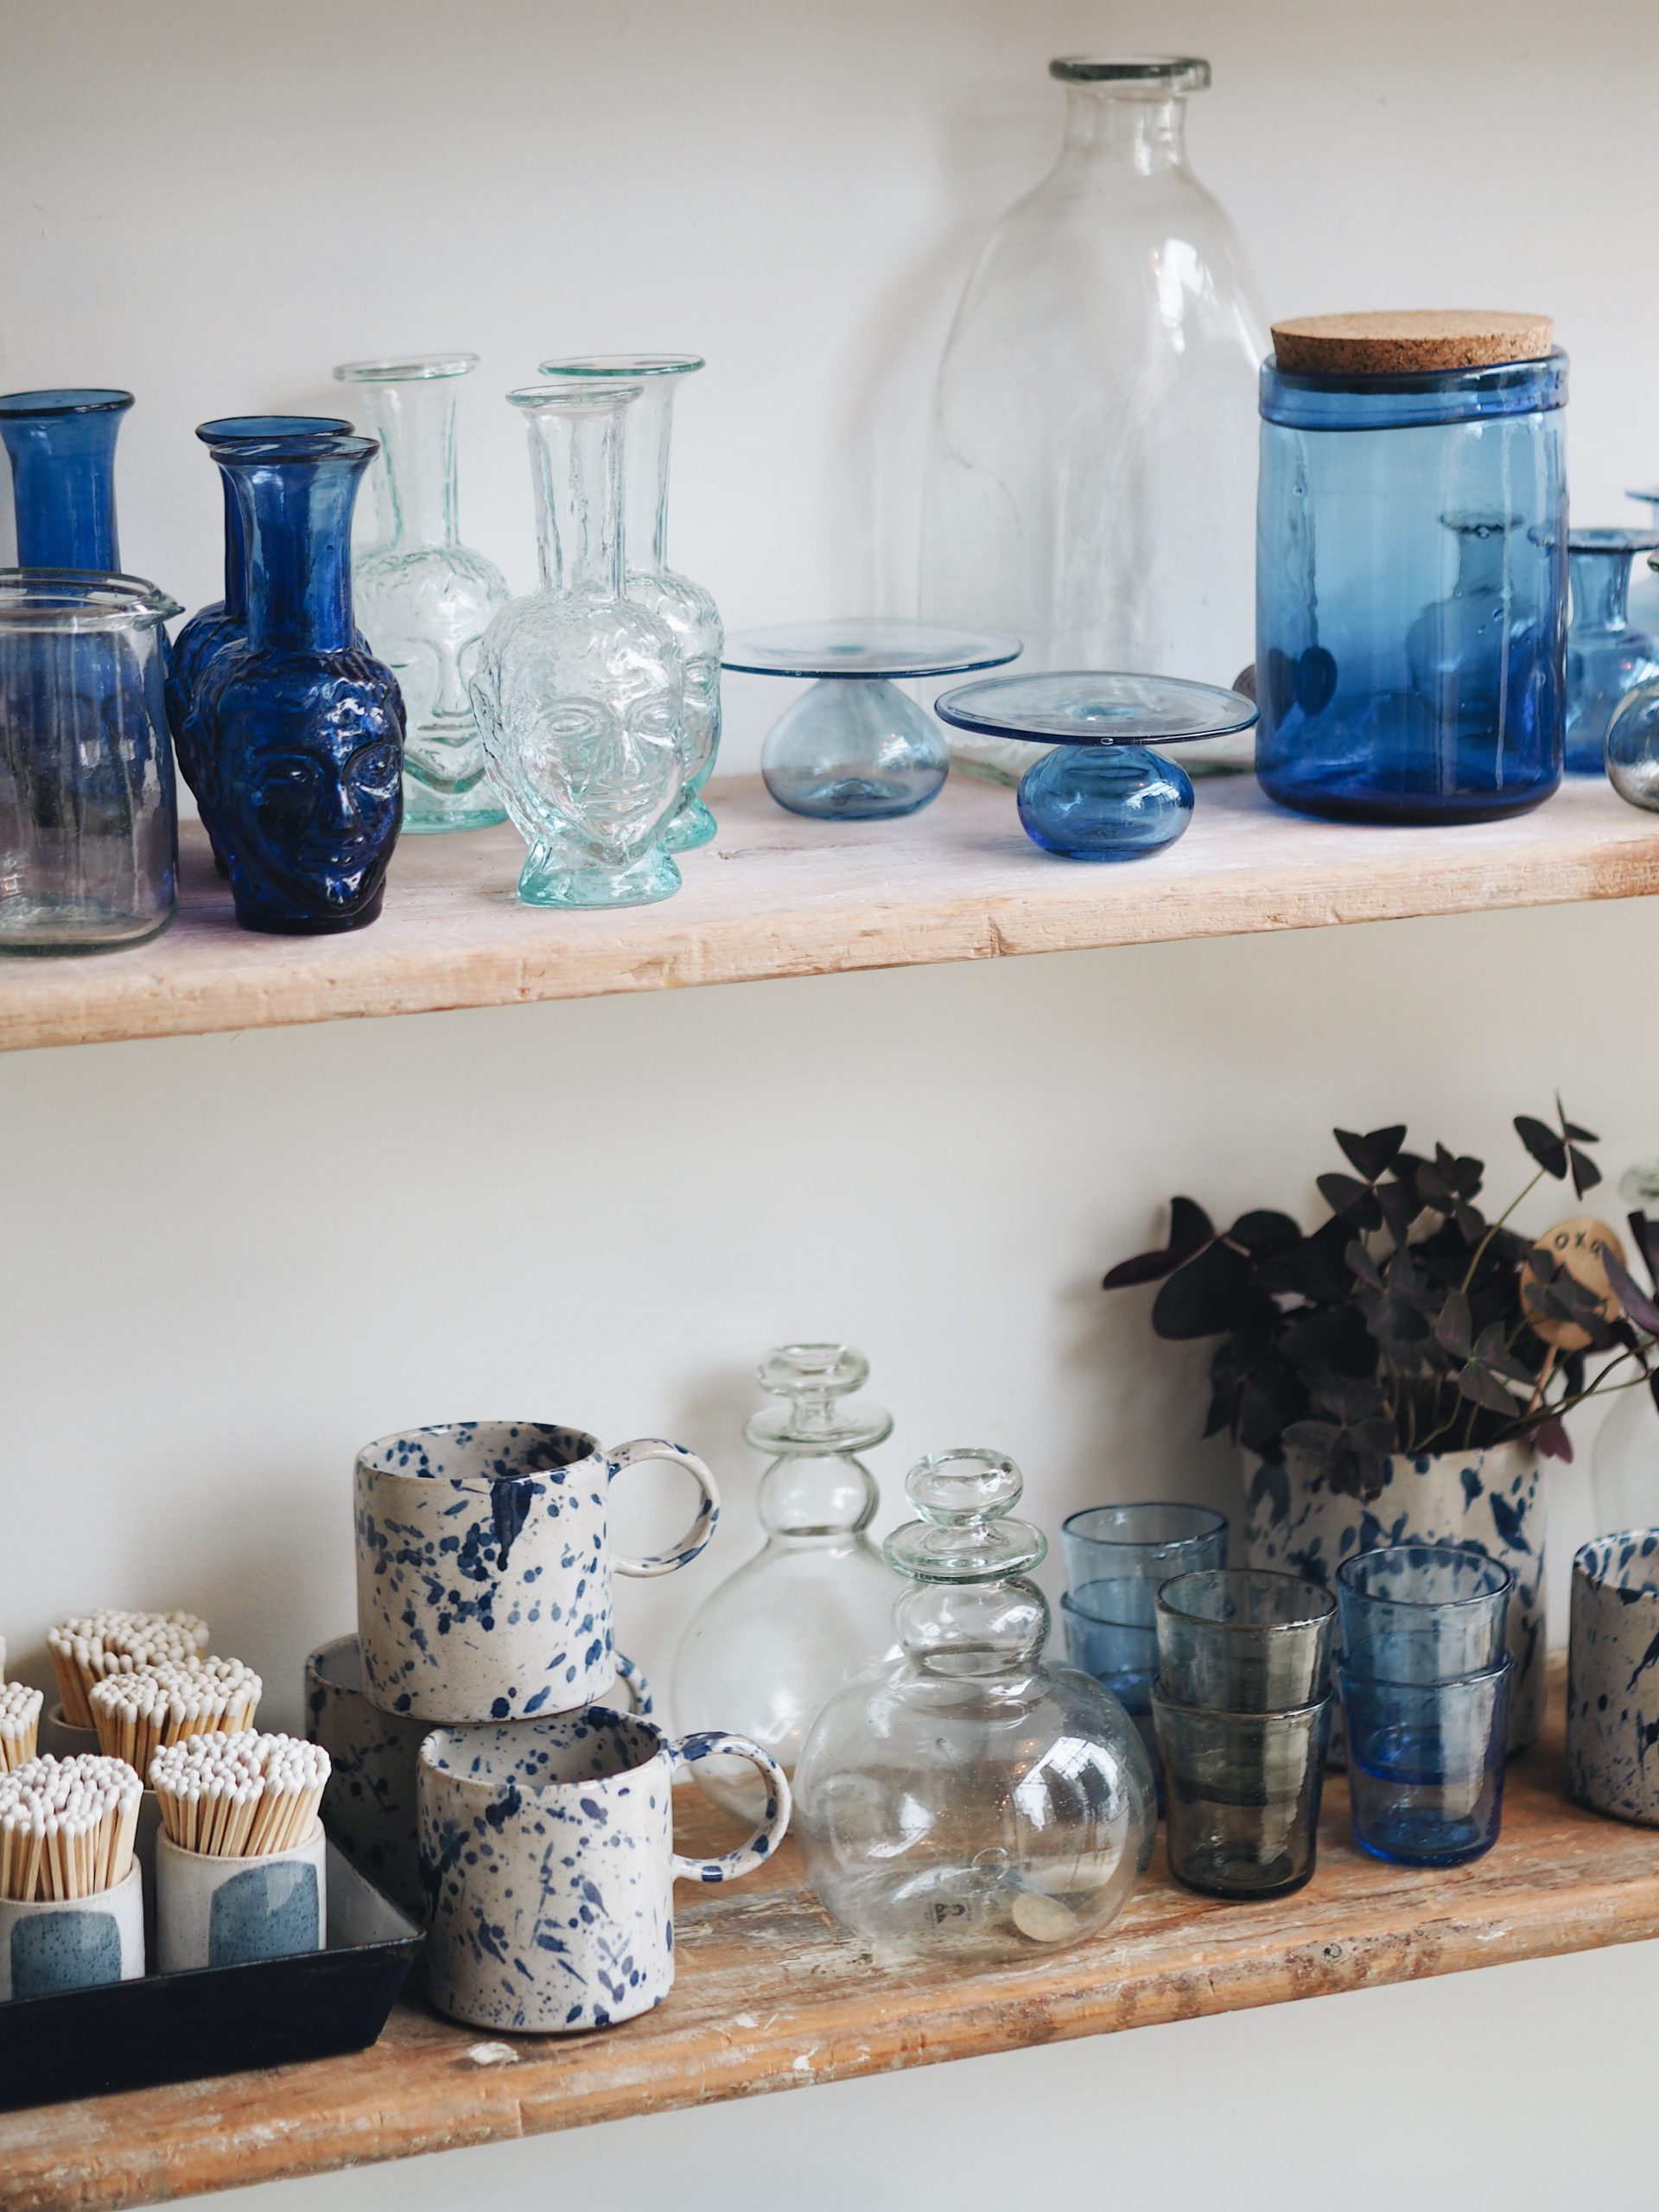 Blue glassware and ceramics inside The Botanical Candle Co. in Shaftesbury, Dorset